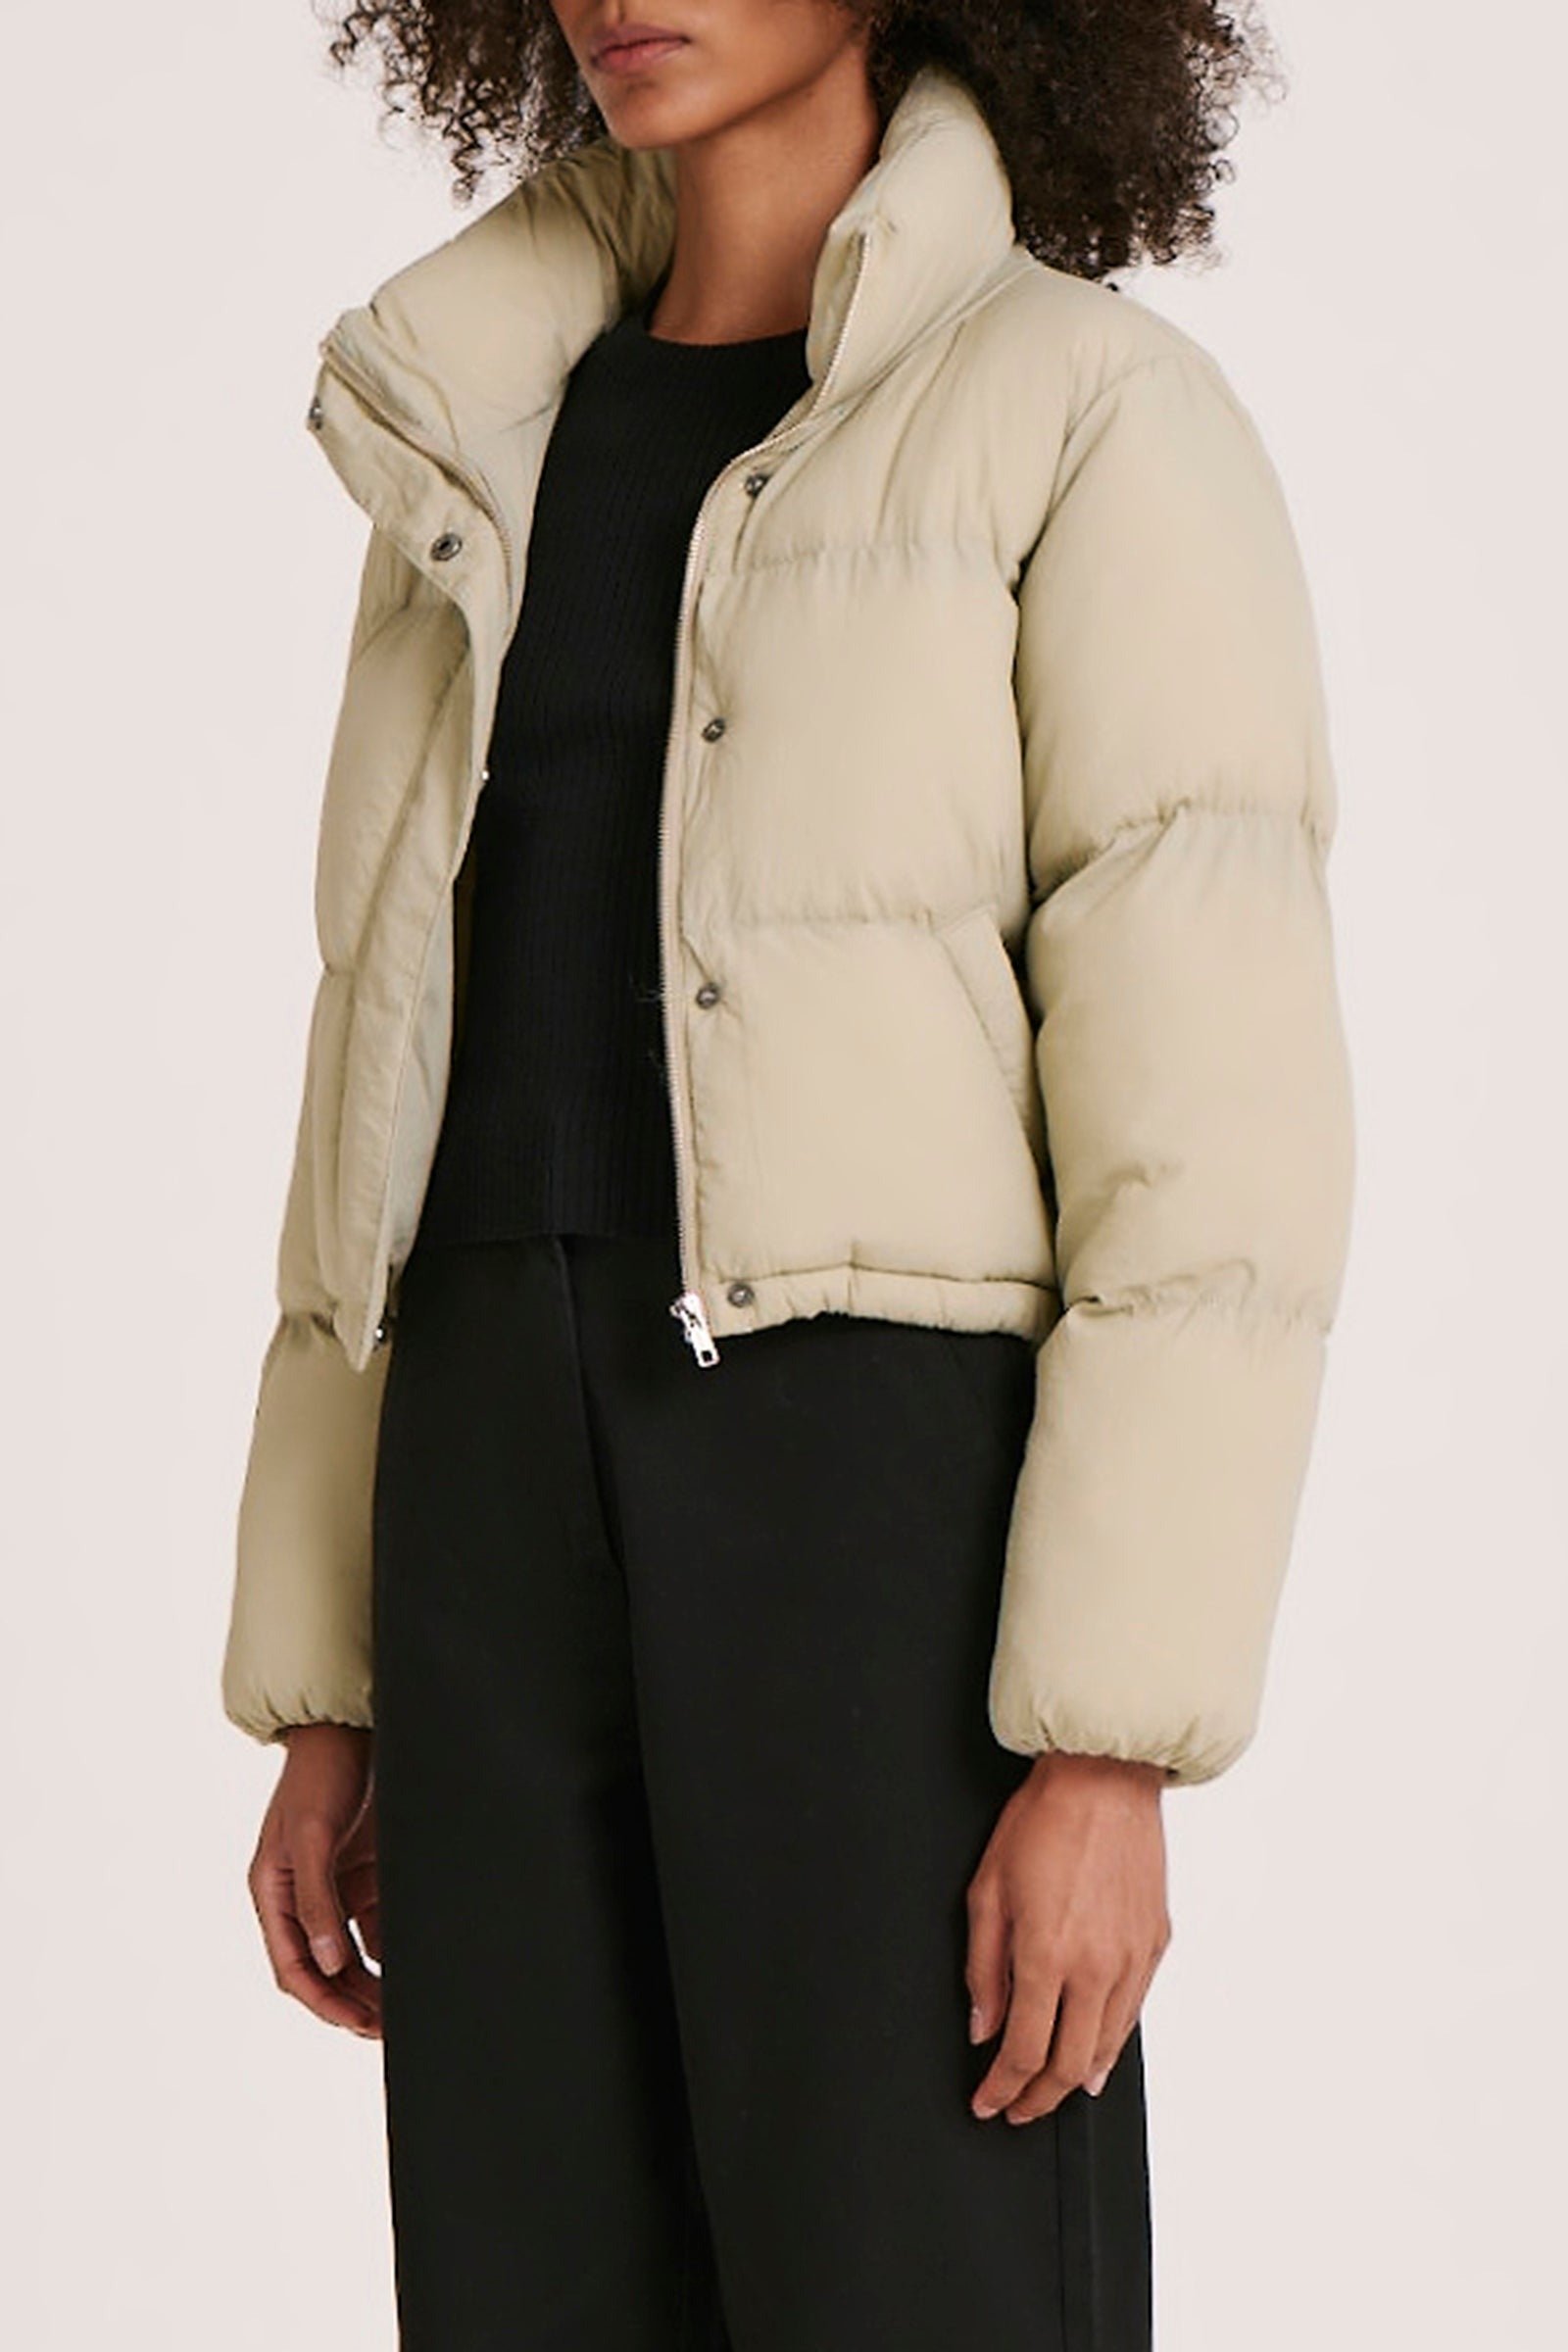 Nude Lucy | Topher Puffer Jacket  - Cucumber